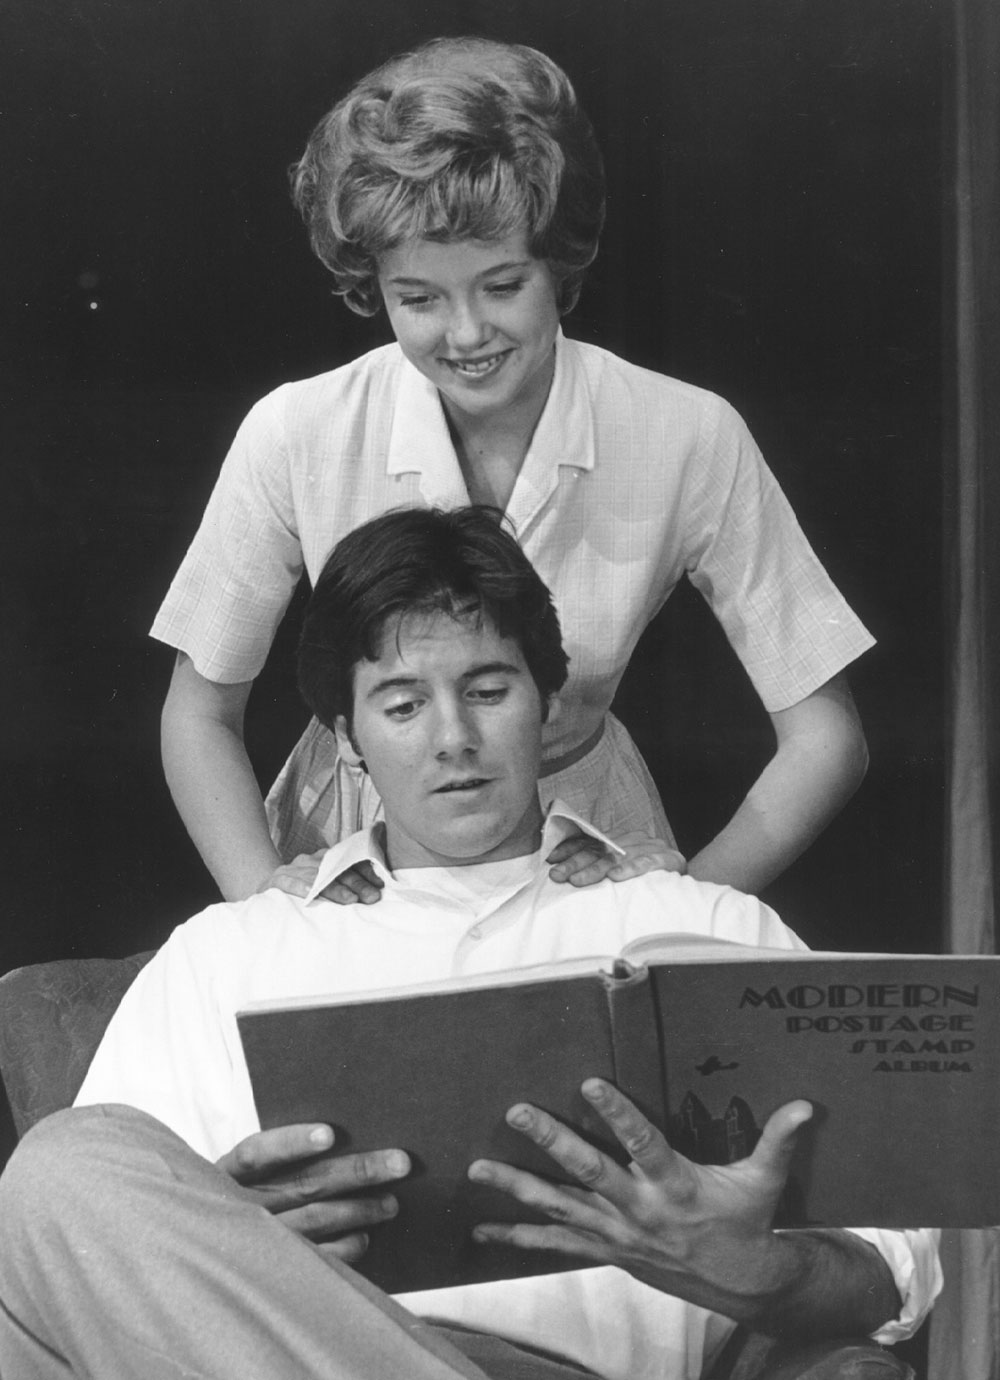 Annette bening in a play as a student at Mesa College